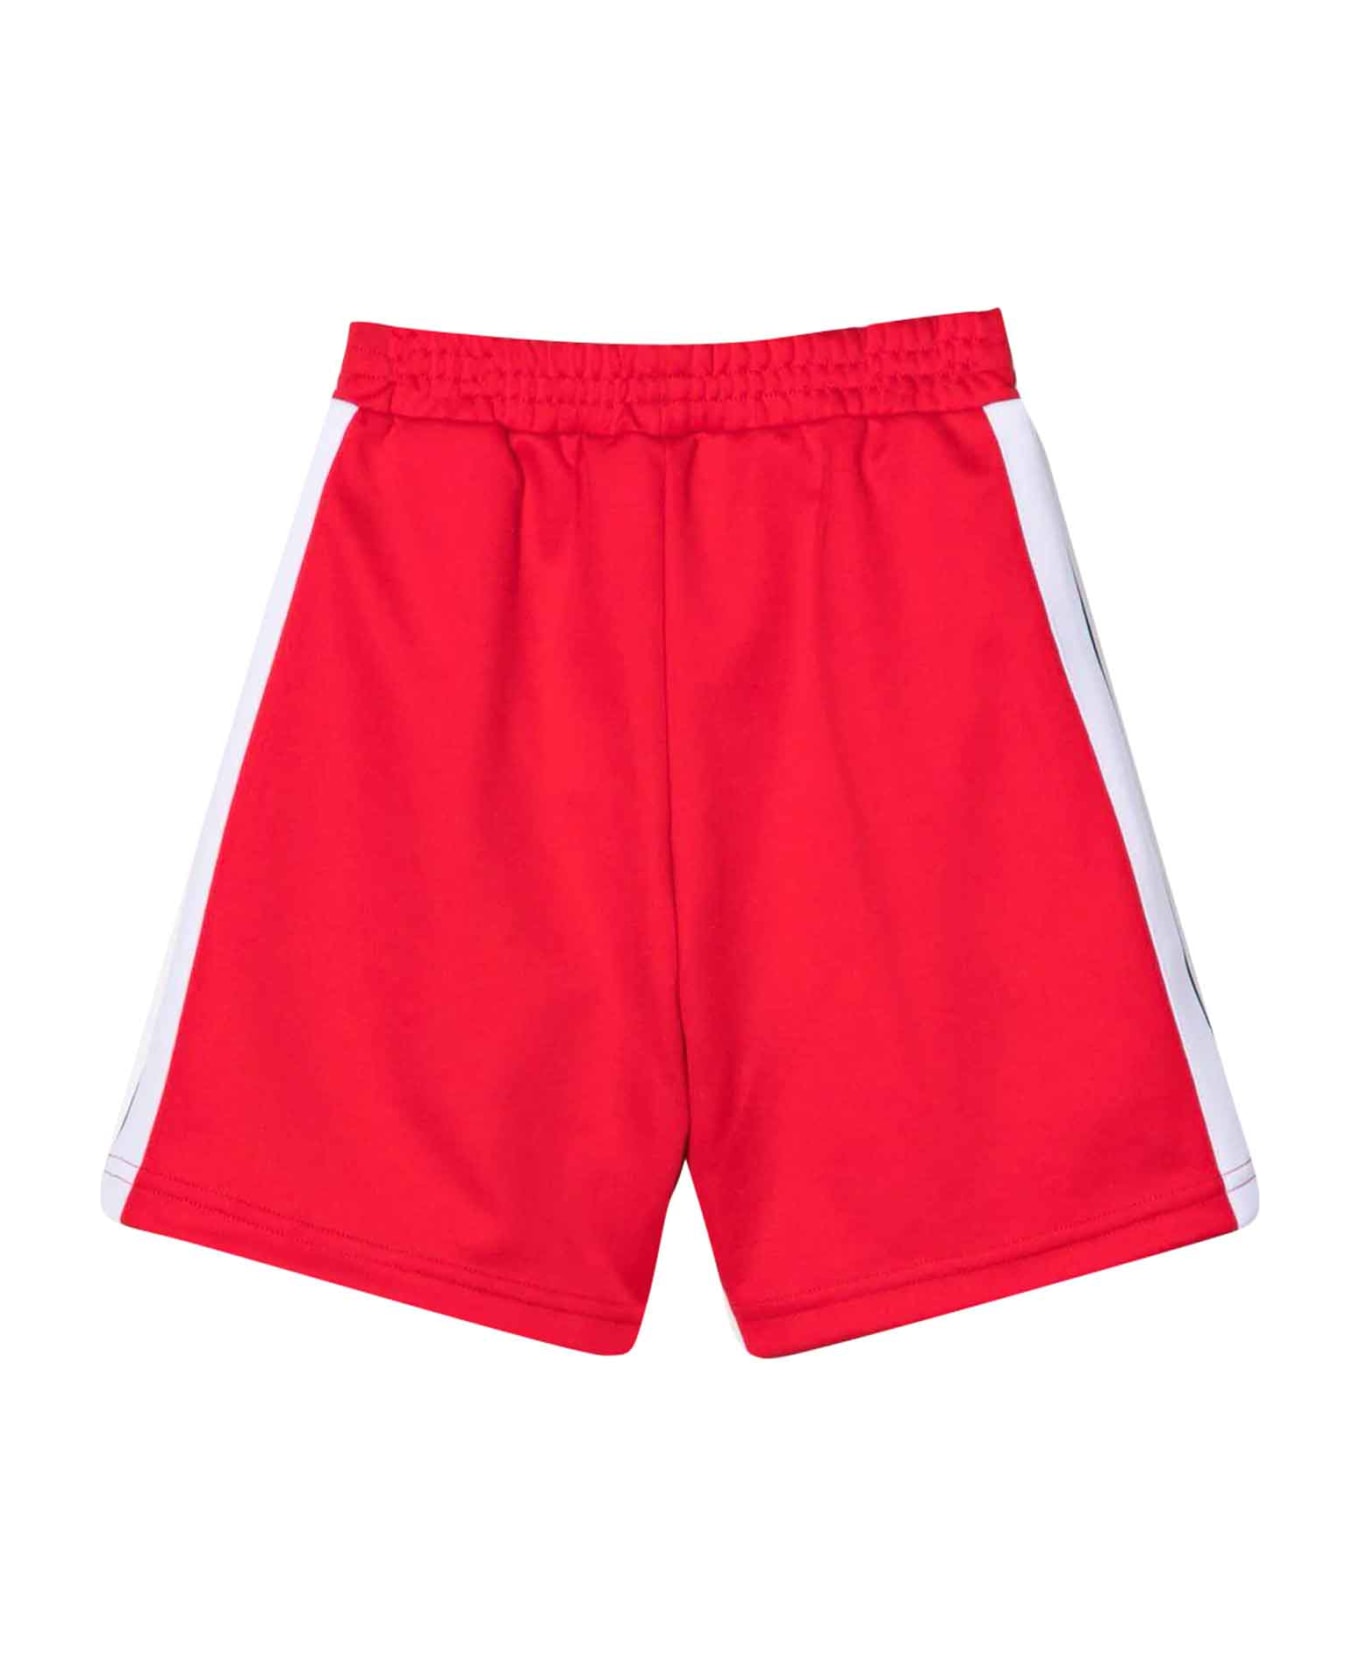 Palm Angels Red Shorts Boy - Rosso/bianco